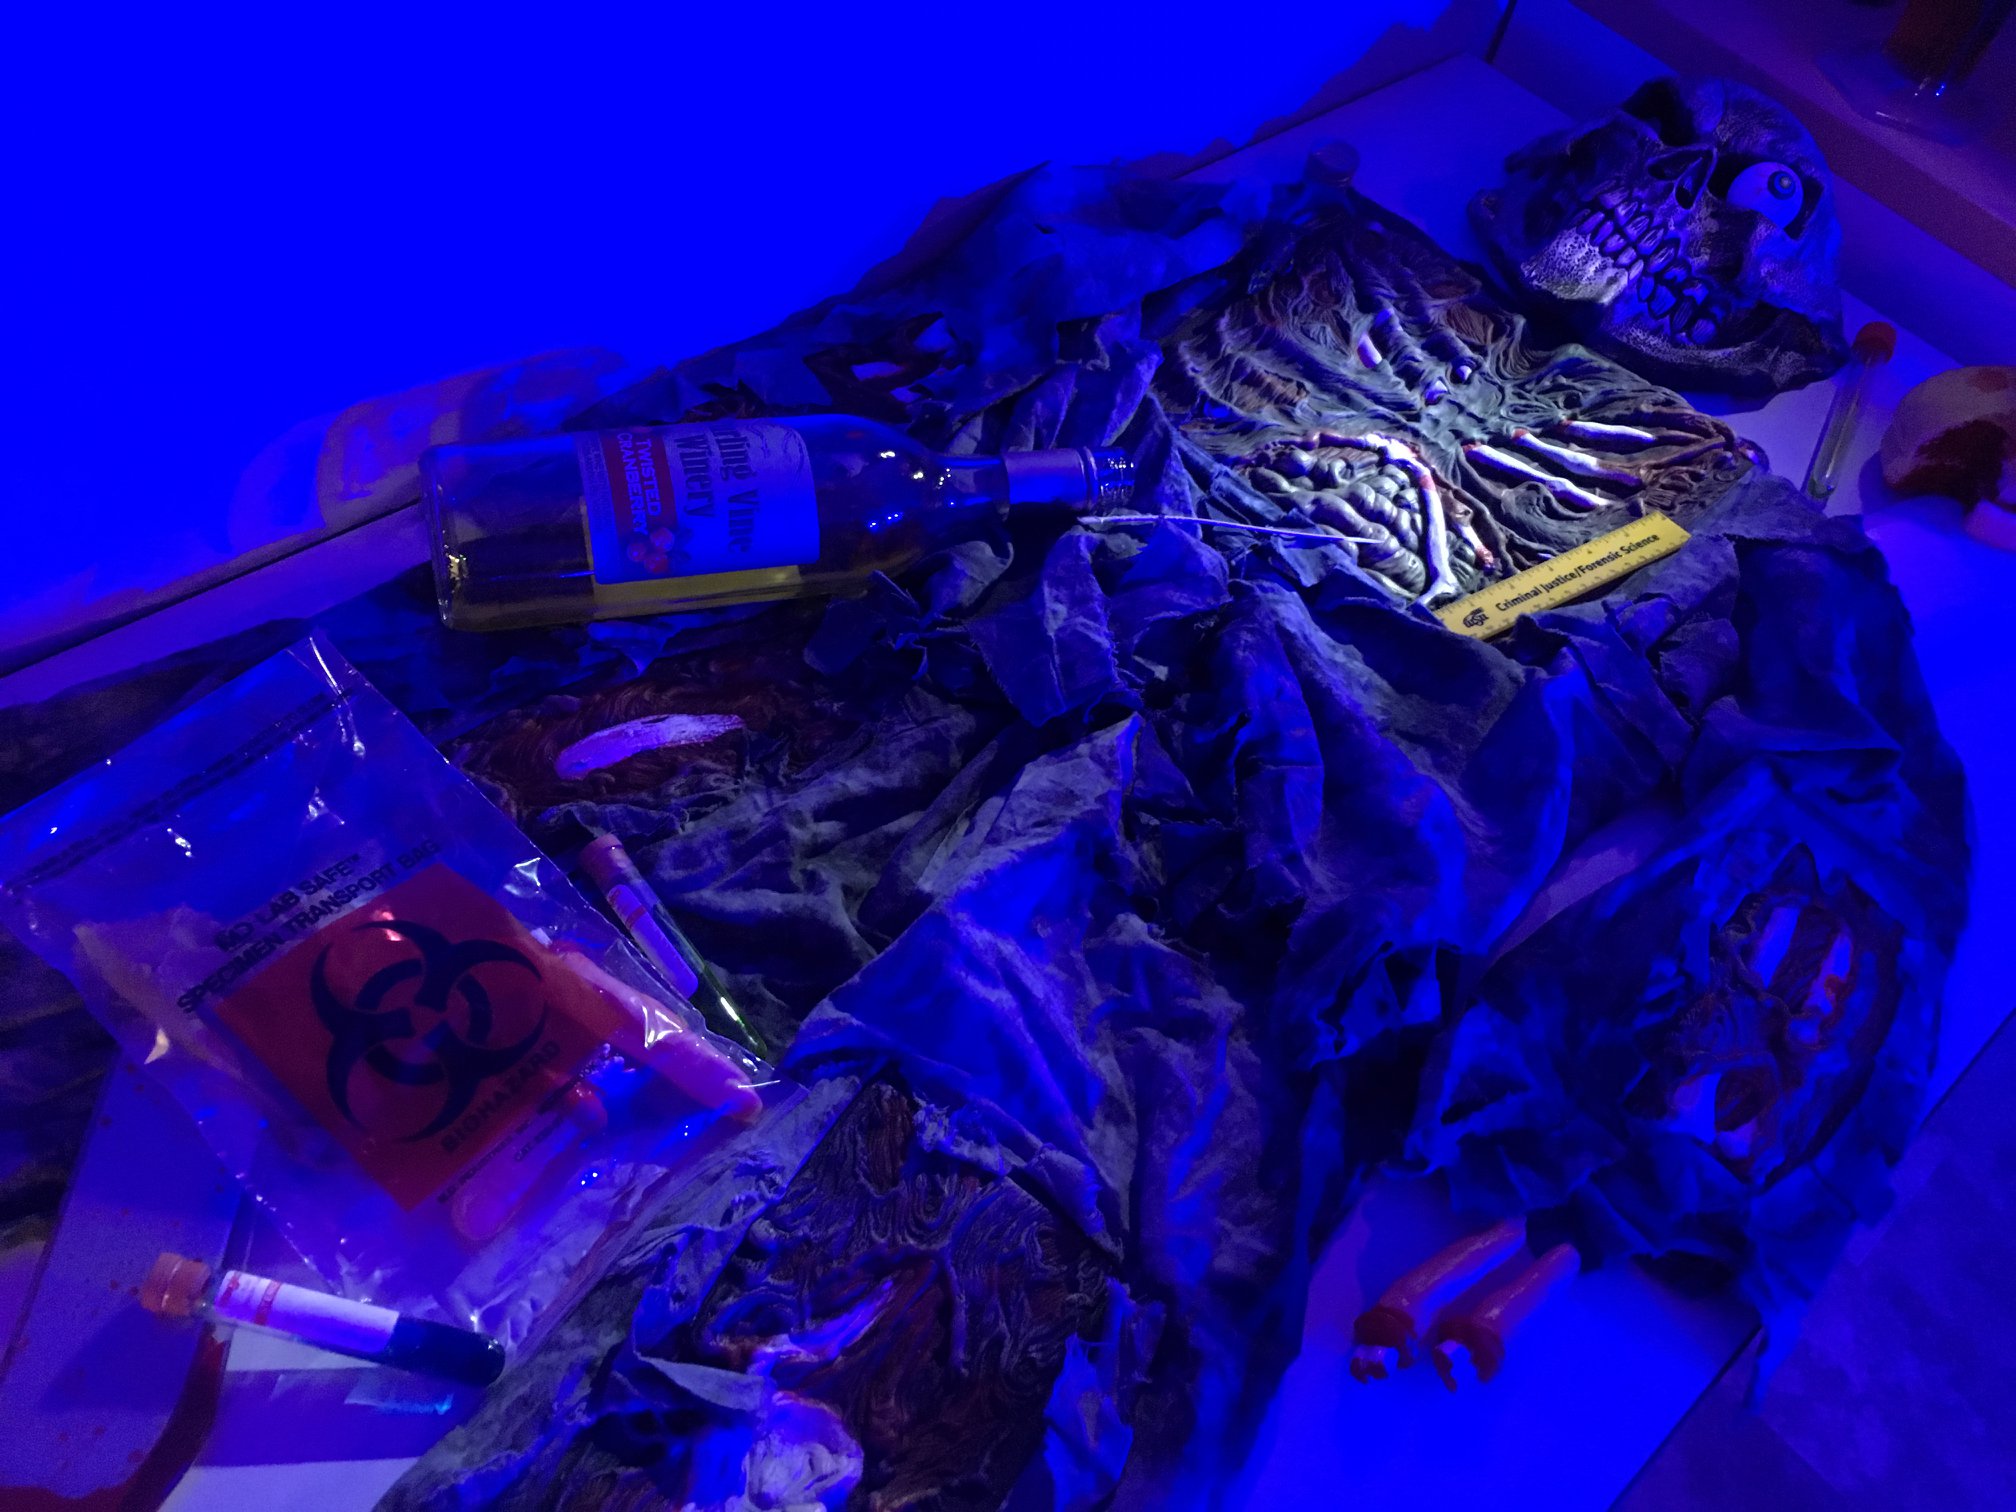 Photograph of a simulated cadaver in low-or-blacklight. 